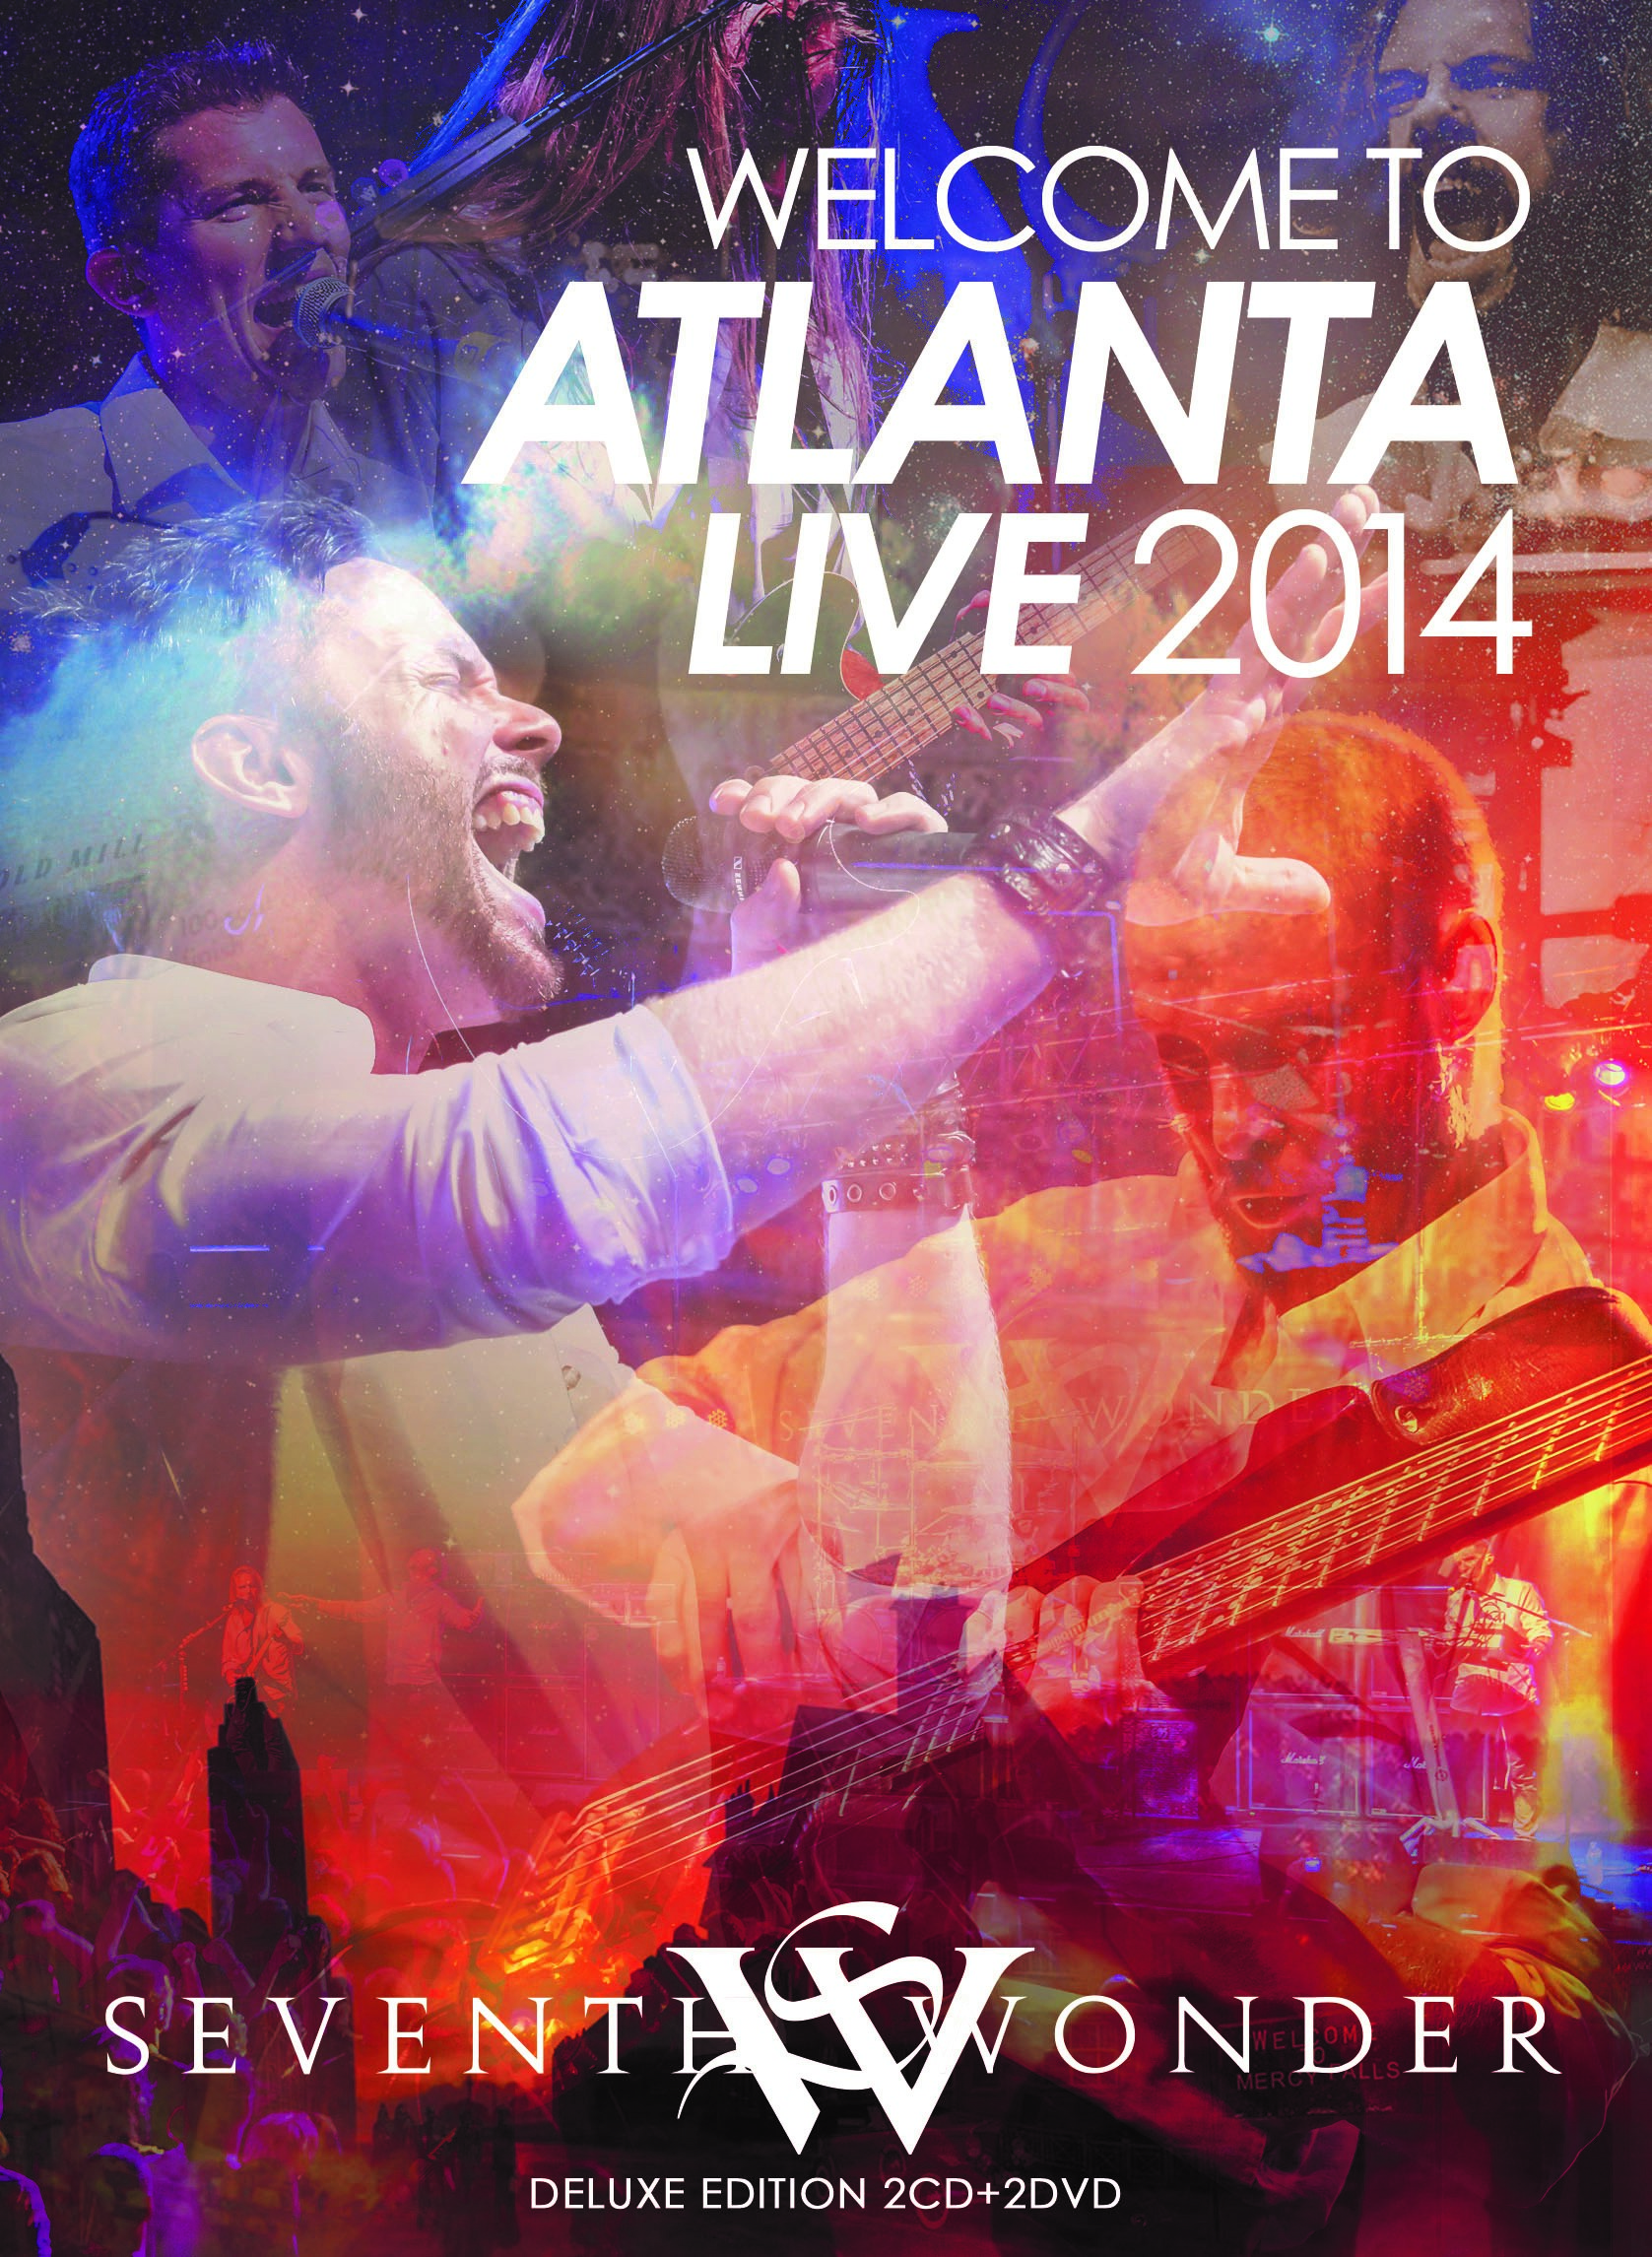 Seventh Wonder - Welcome To Atlanta Live 2014 - 2xCD+2xDVD